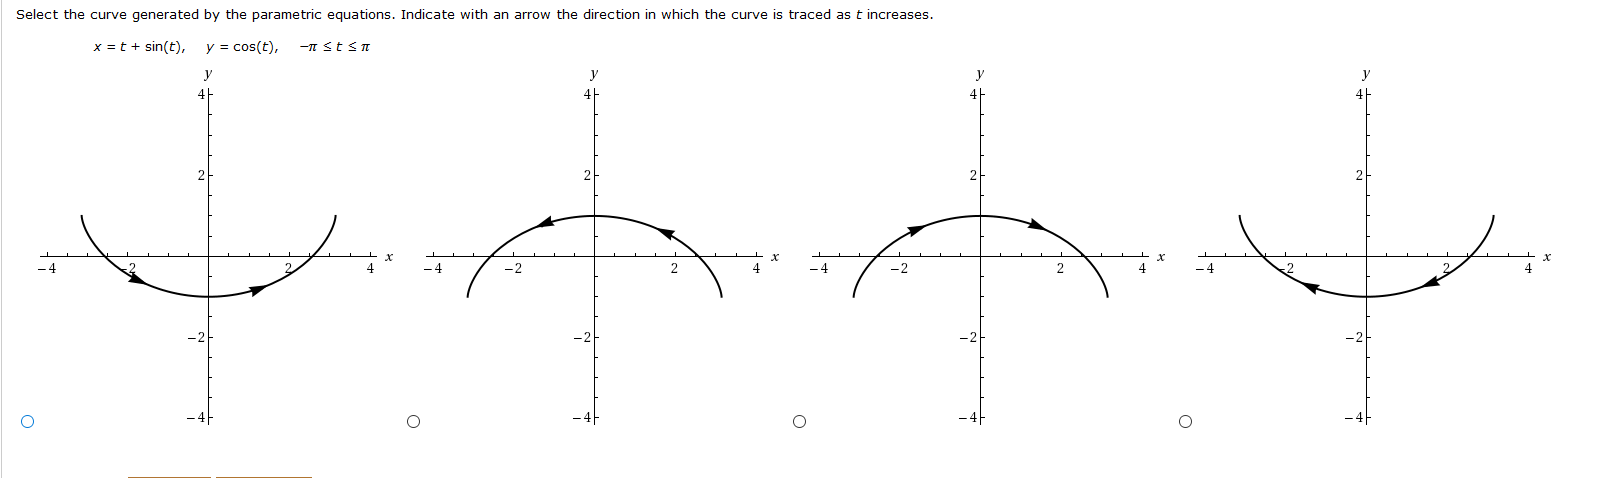 Select the curve generated by the parametric equations. Indicate with an arrow the direction in which the curve is traced as t increases.
y cos(t)
x =t sin(t),
-IT StsT
у
у
У
-2
2
4
-2
2
4
O
